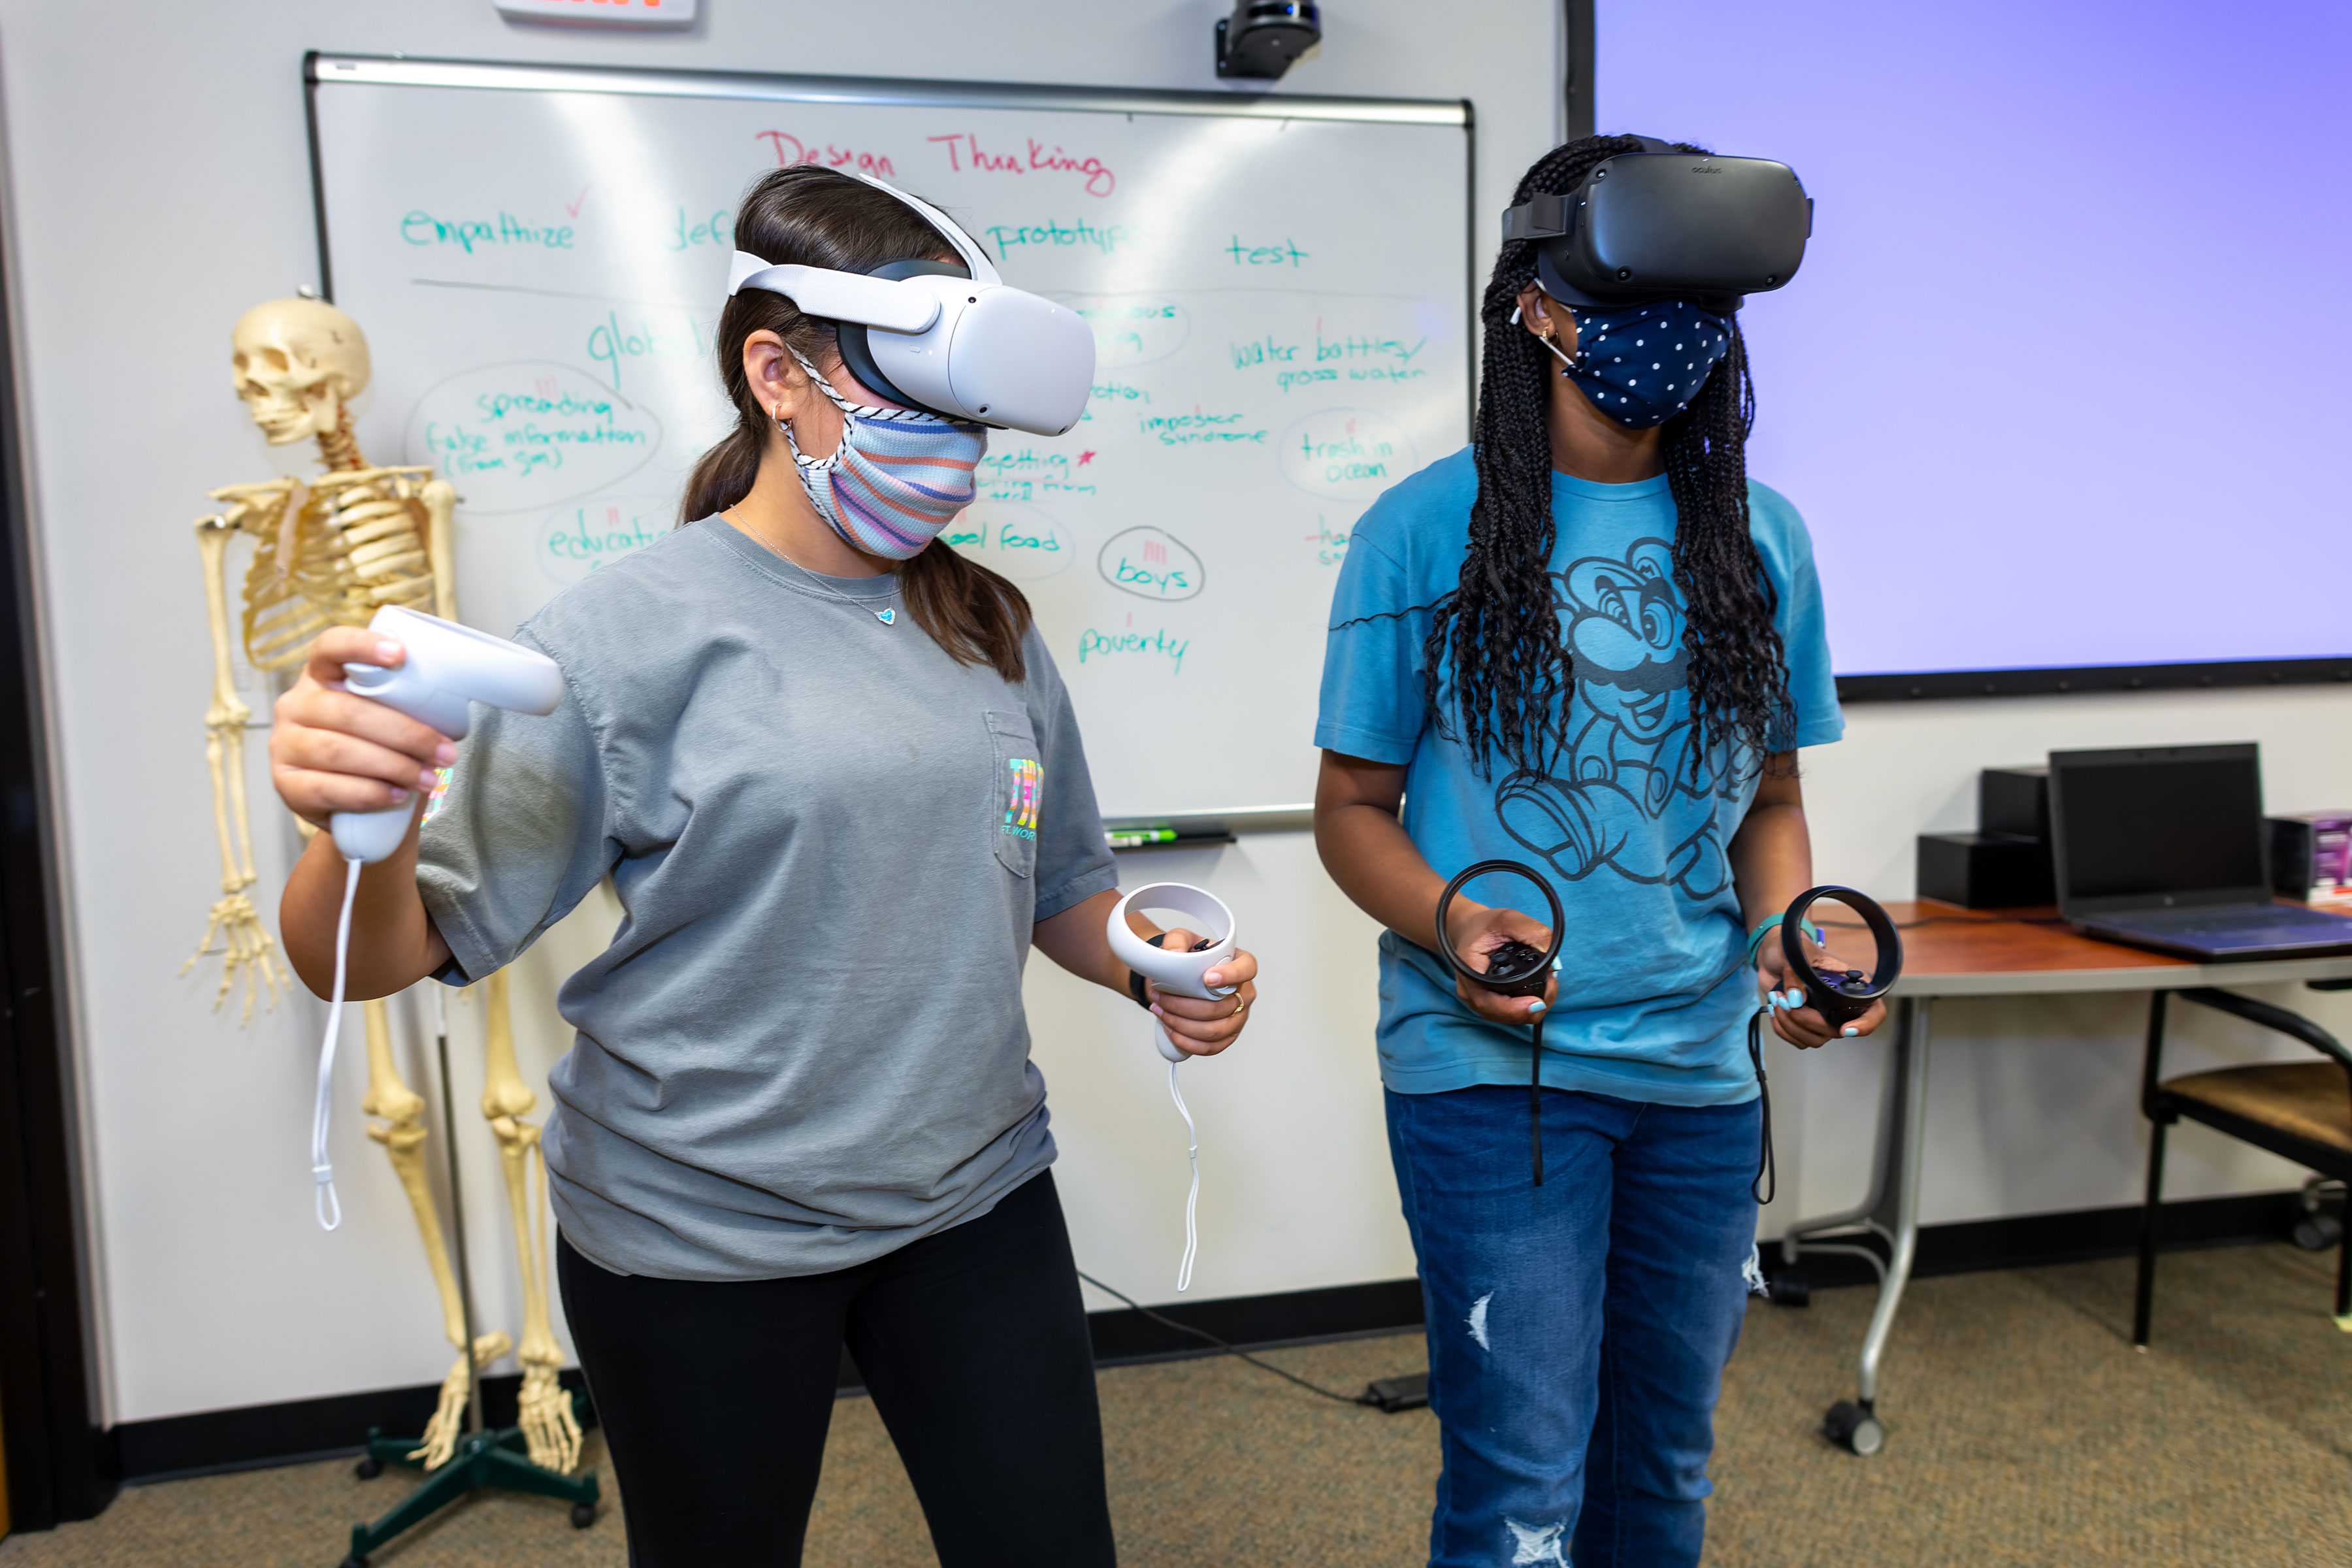 Amelia Rodriguez and Addi Gui, middle school students from Fort Worth, test VR technologies.